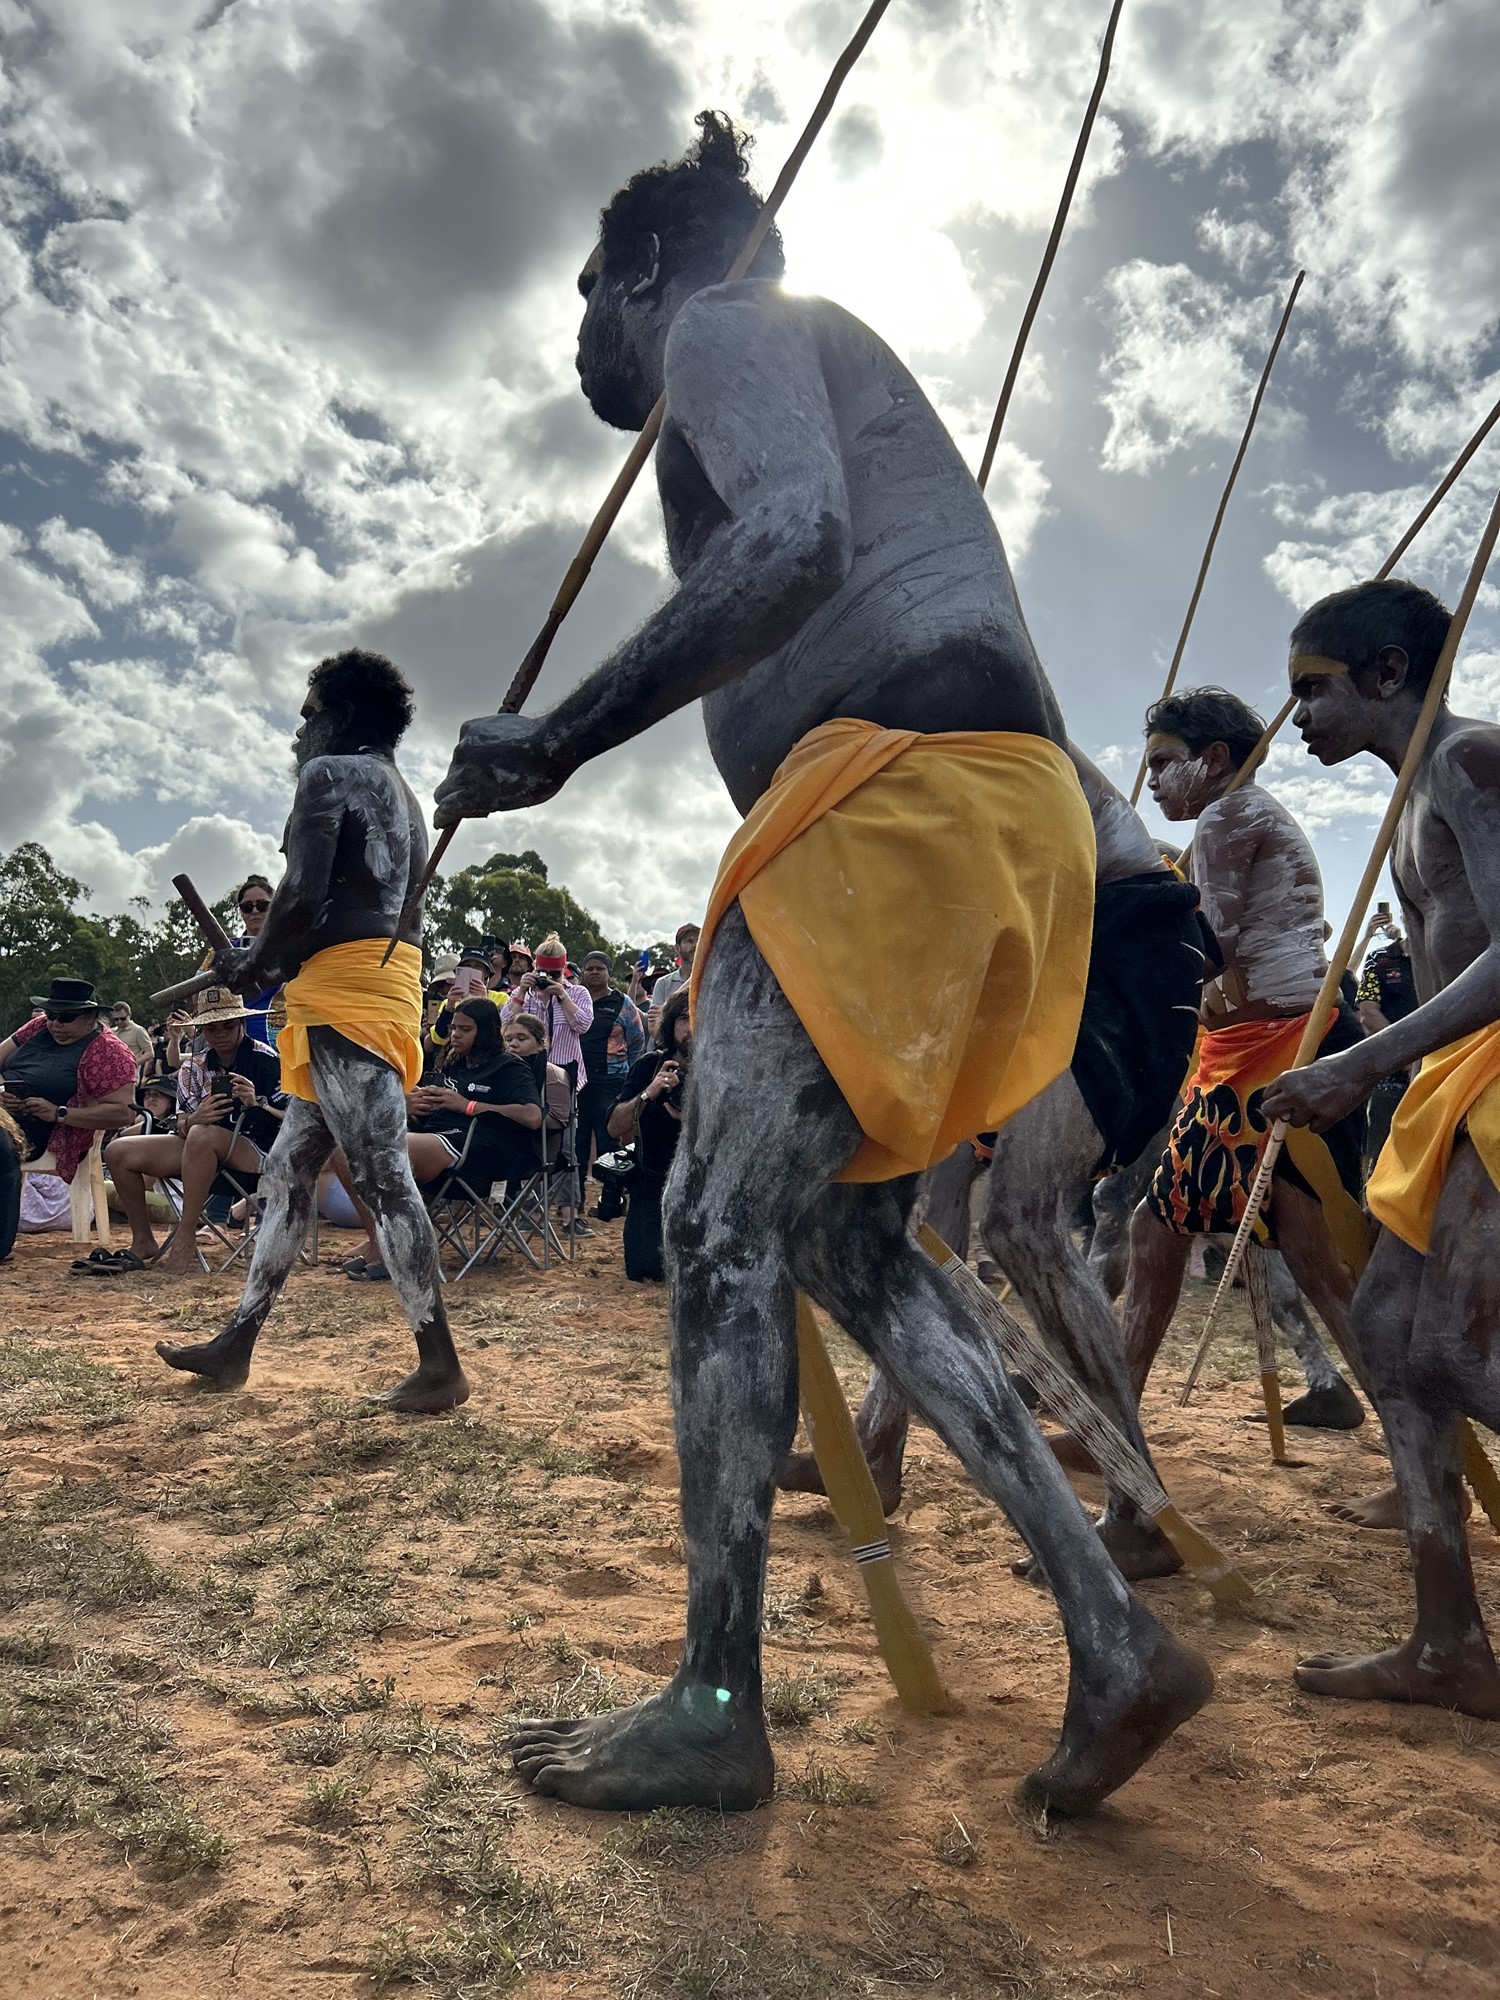 The World: Intonga - Stick Fighting in South Africa 